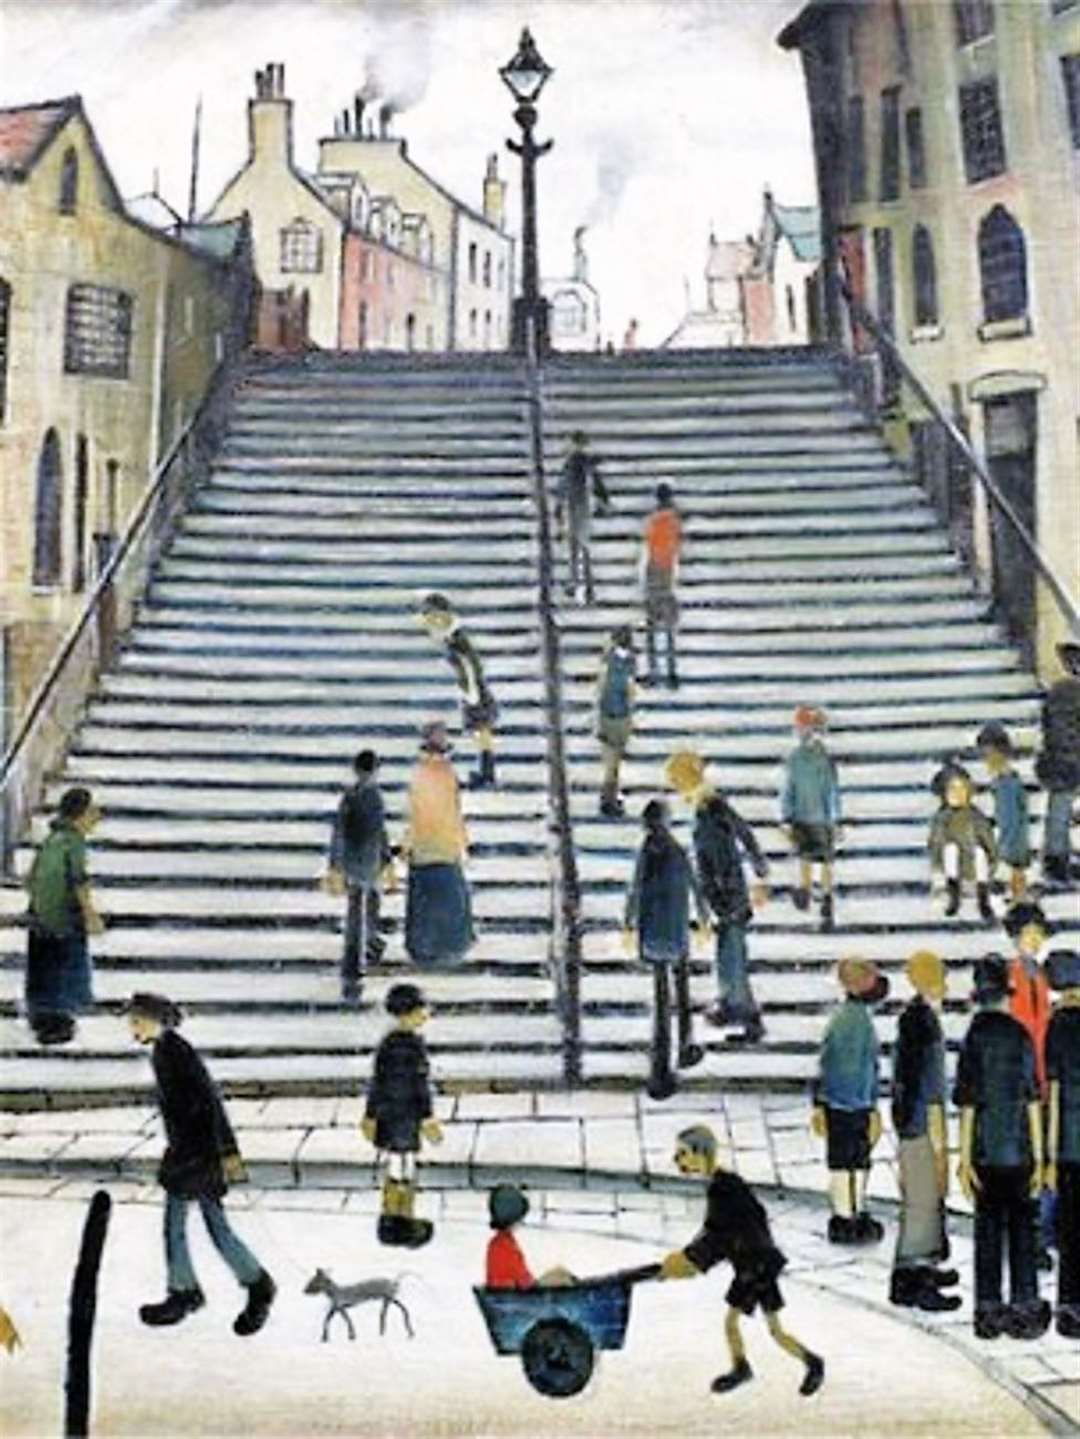 LS Lowry's painting of the Black Stairs in Wick which fetched almost £900,000 a decade ago.